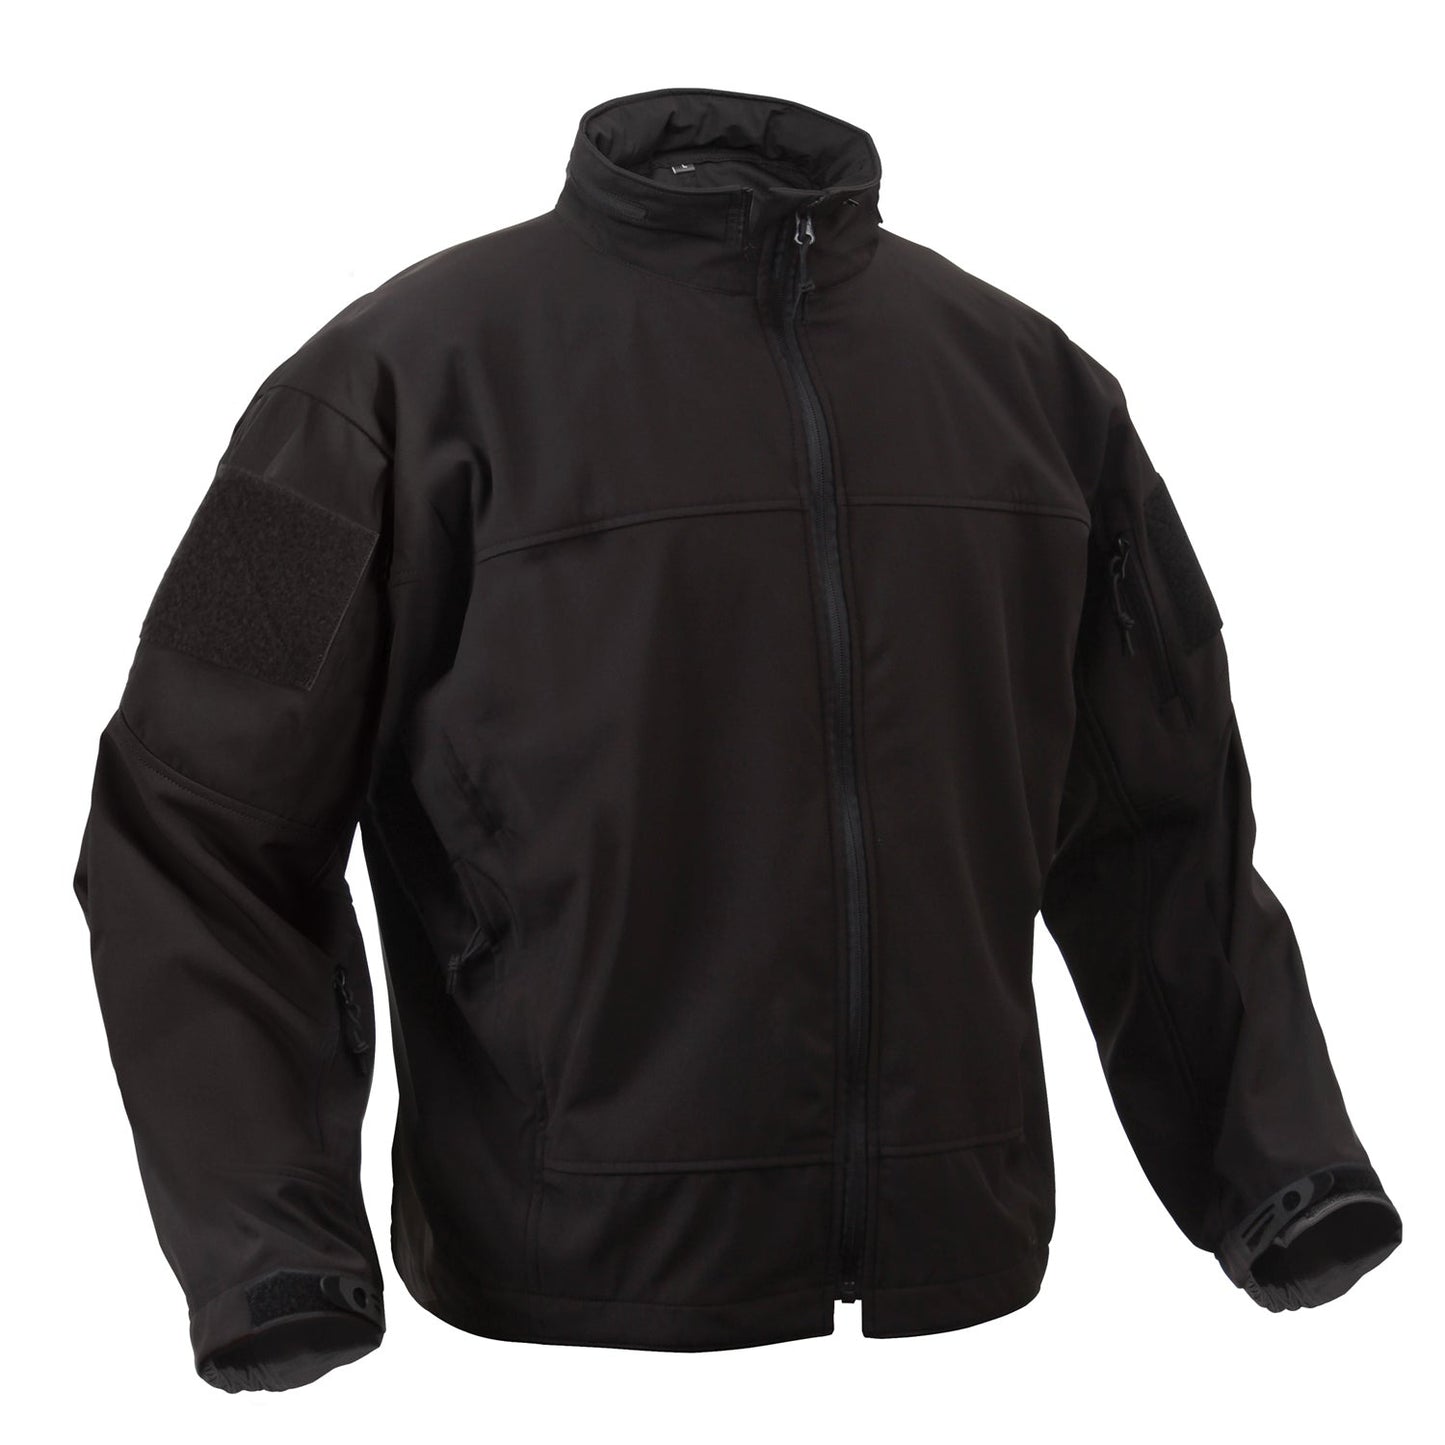 Lightweight and low profile, Rothco’s Covert Ops Lightweight Soft Shell Jacket is the premier choice for an everyday outdoor jacket that offers all-weather protection, keeping you warm and dry in any environment.